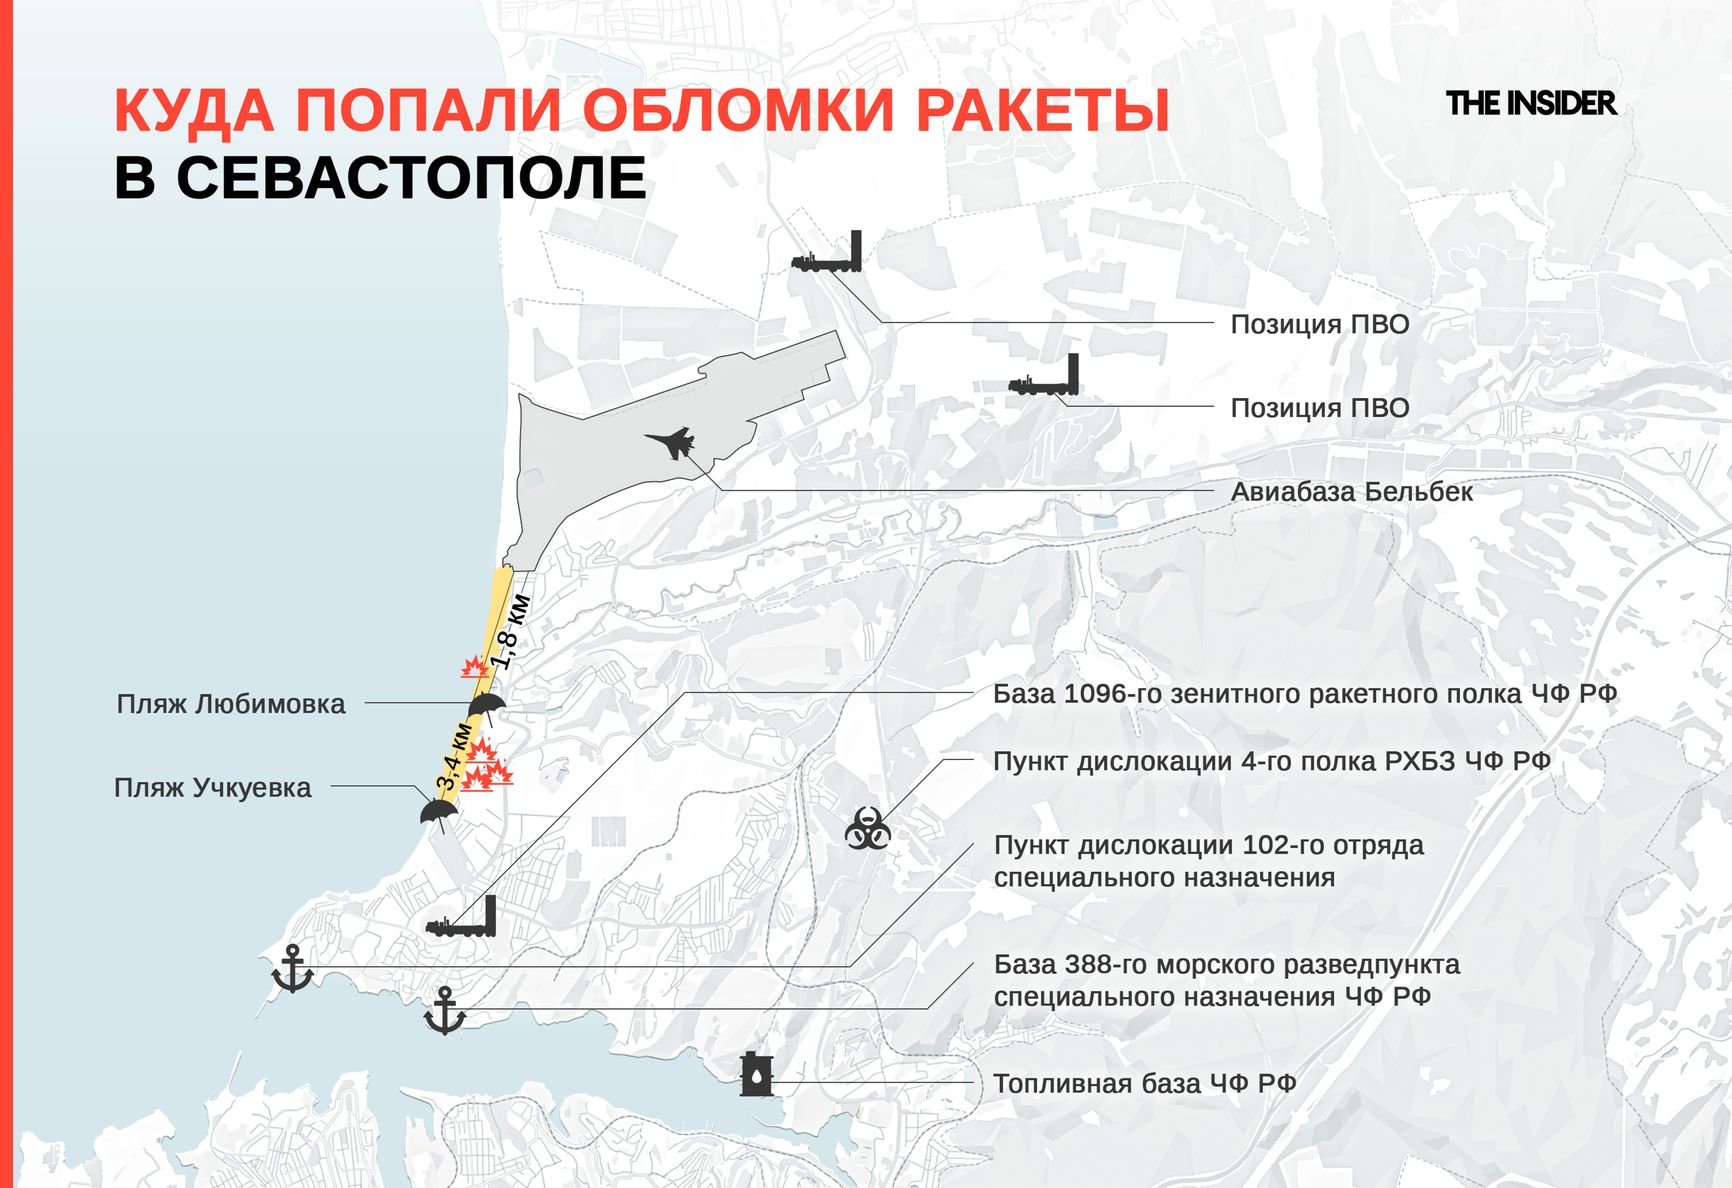 A map showing the location of the tragedy, The Belbek airfield to the north of the affected beaches is marked with a fighter jet icon